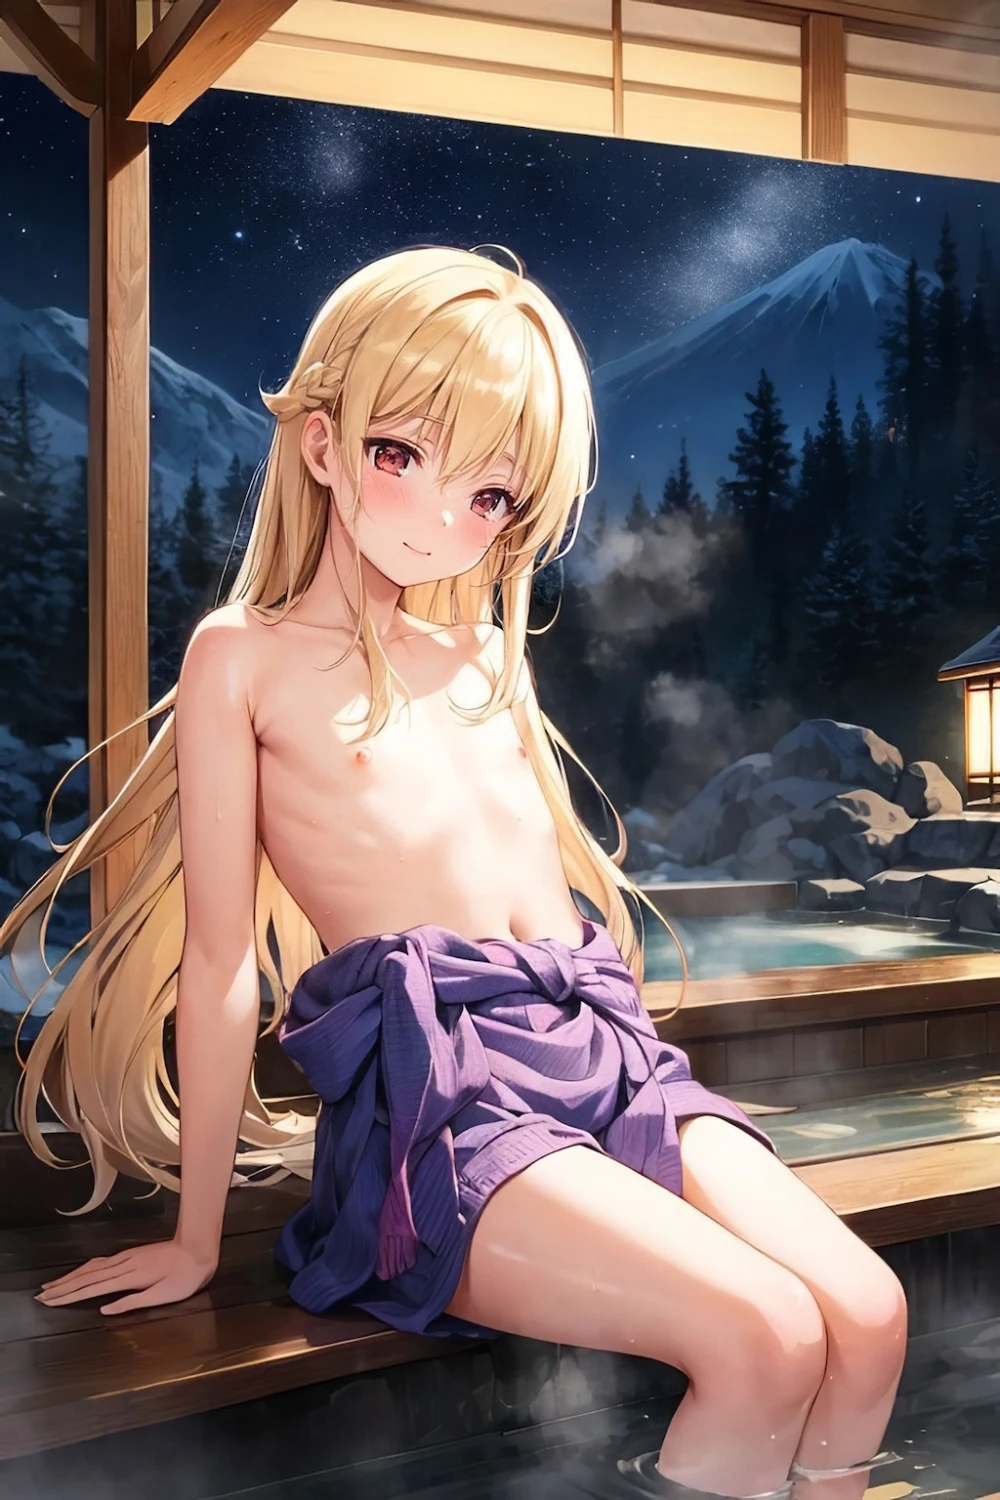 onsen-anime-style-adults-only-2-35